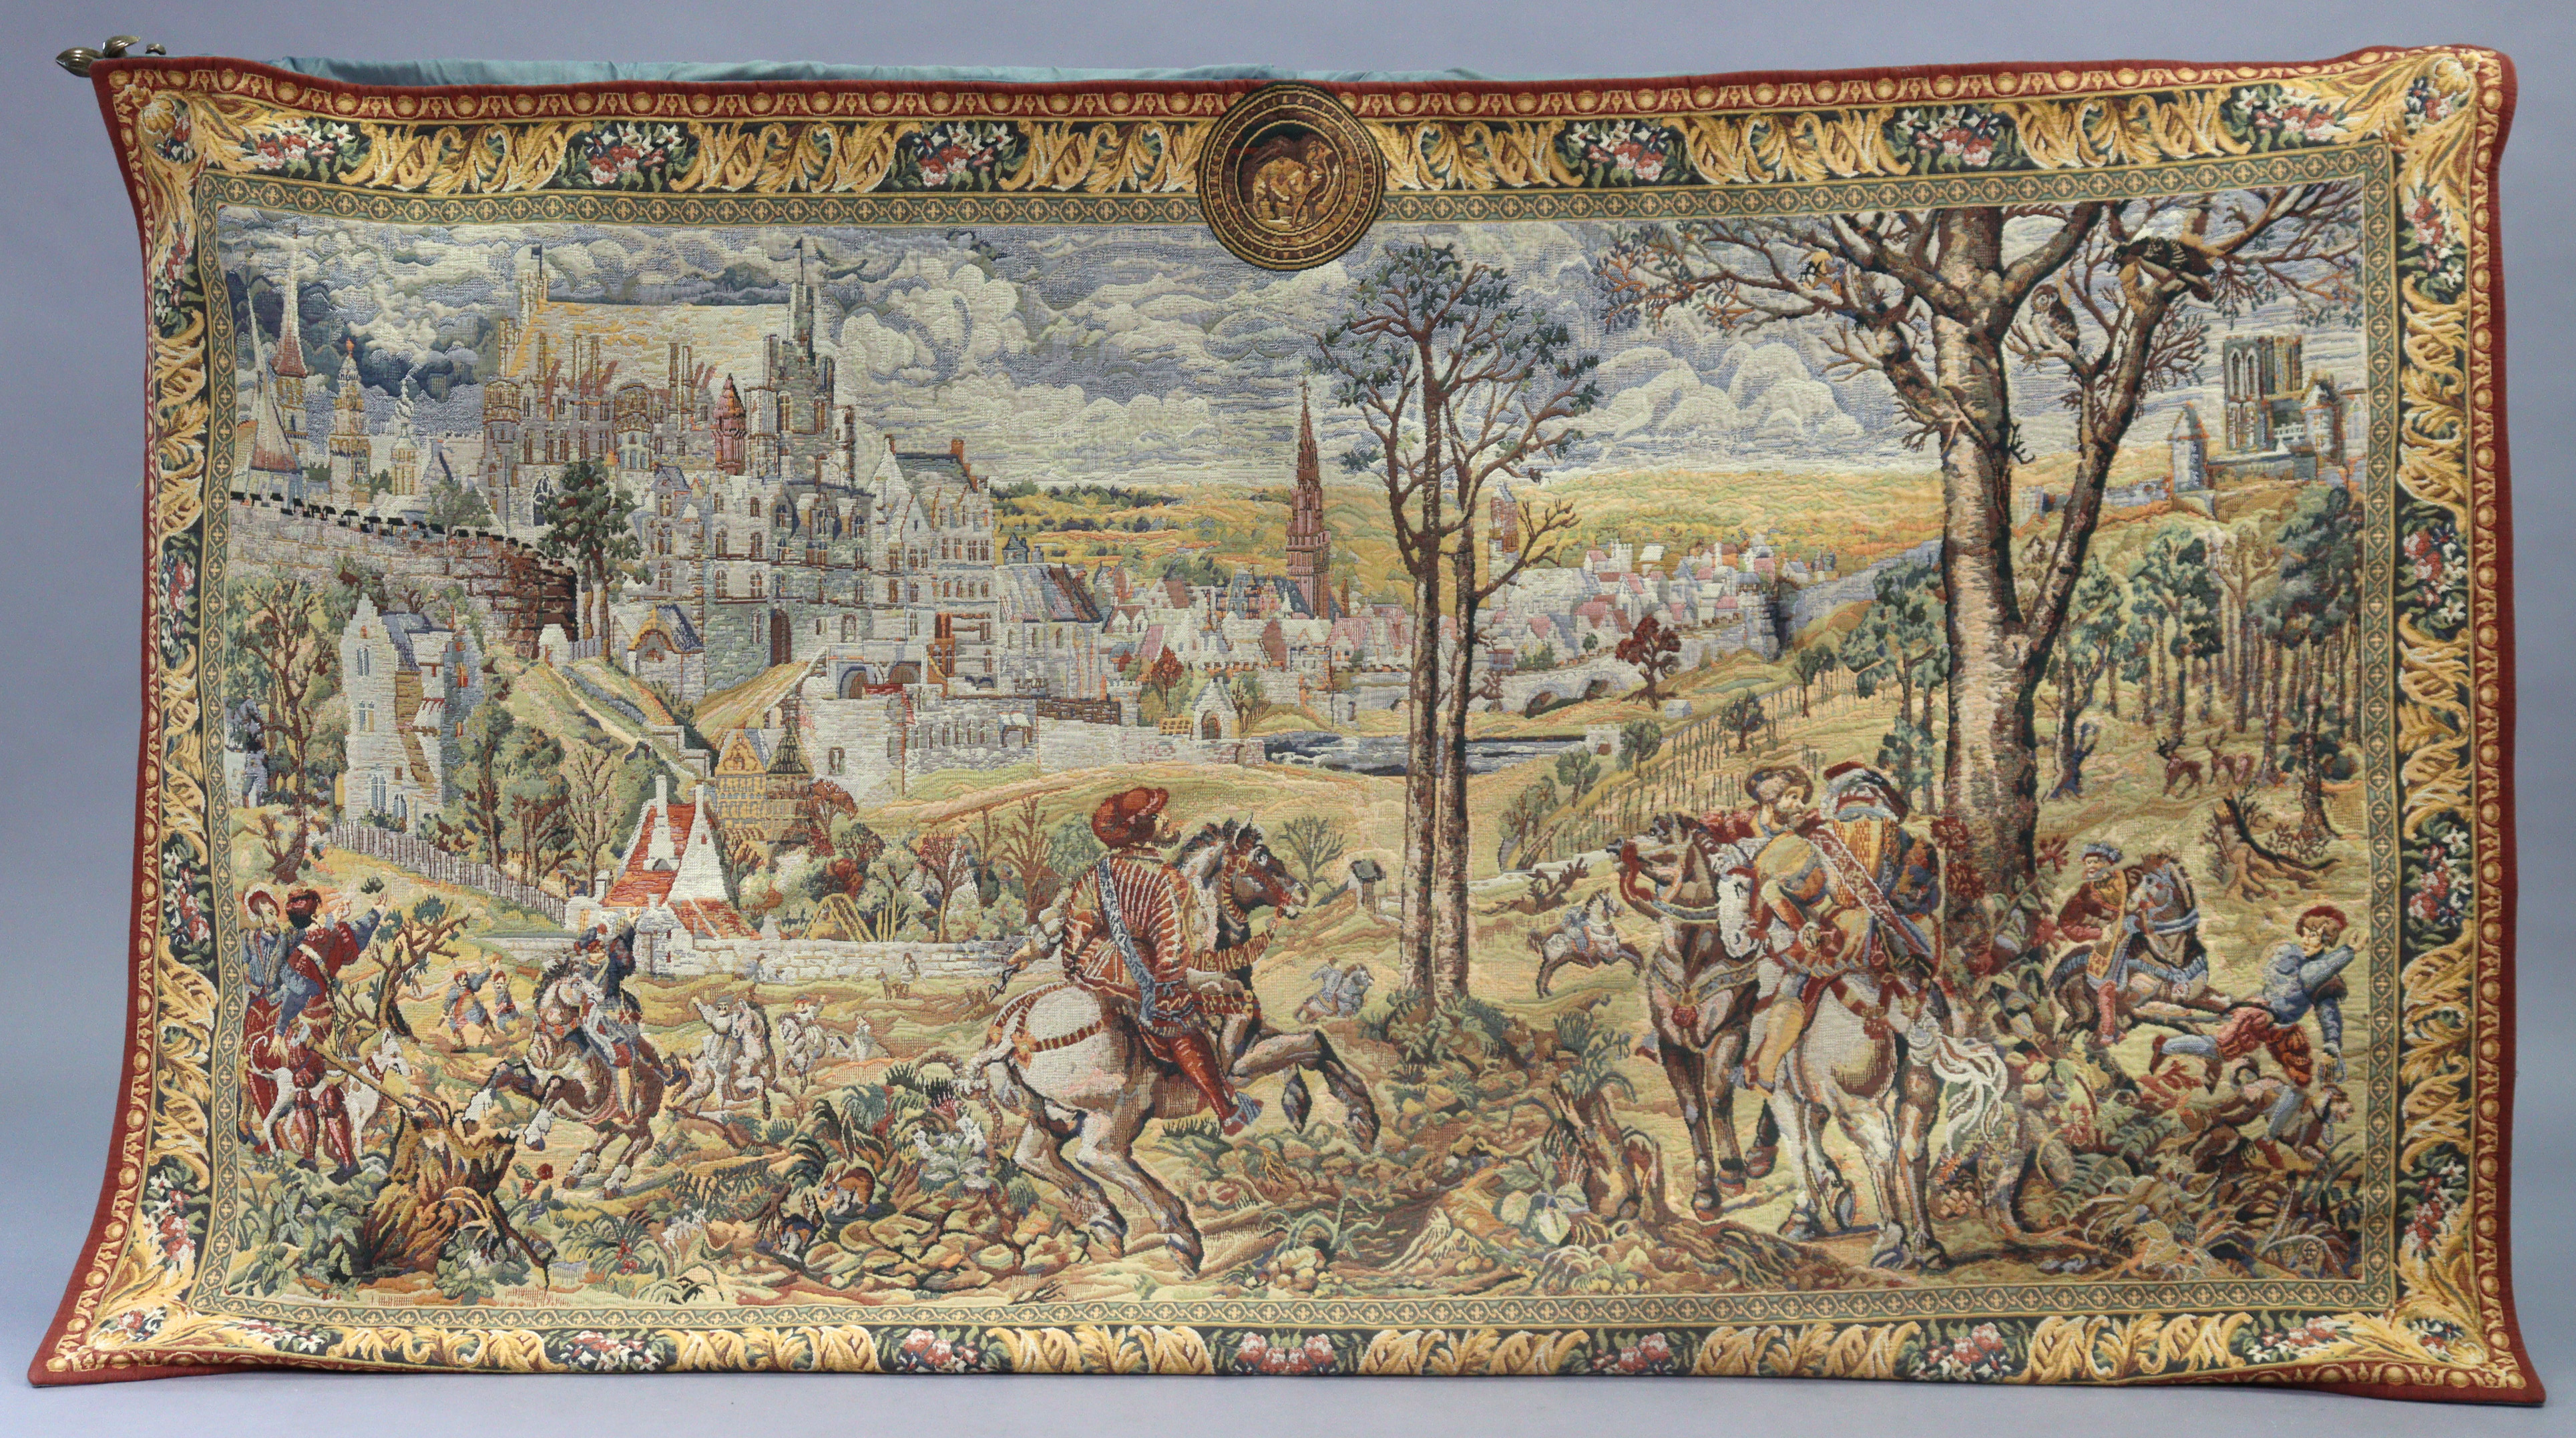 A Flanders Tapestries (Belgian) tapestry in the 17thC style depicting a hunting scene, 210cm x 120cm